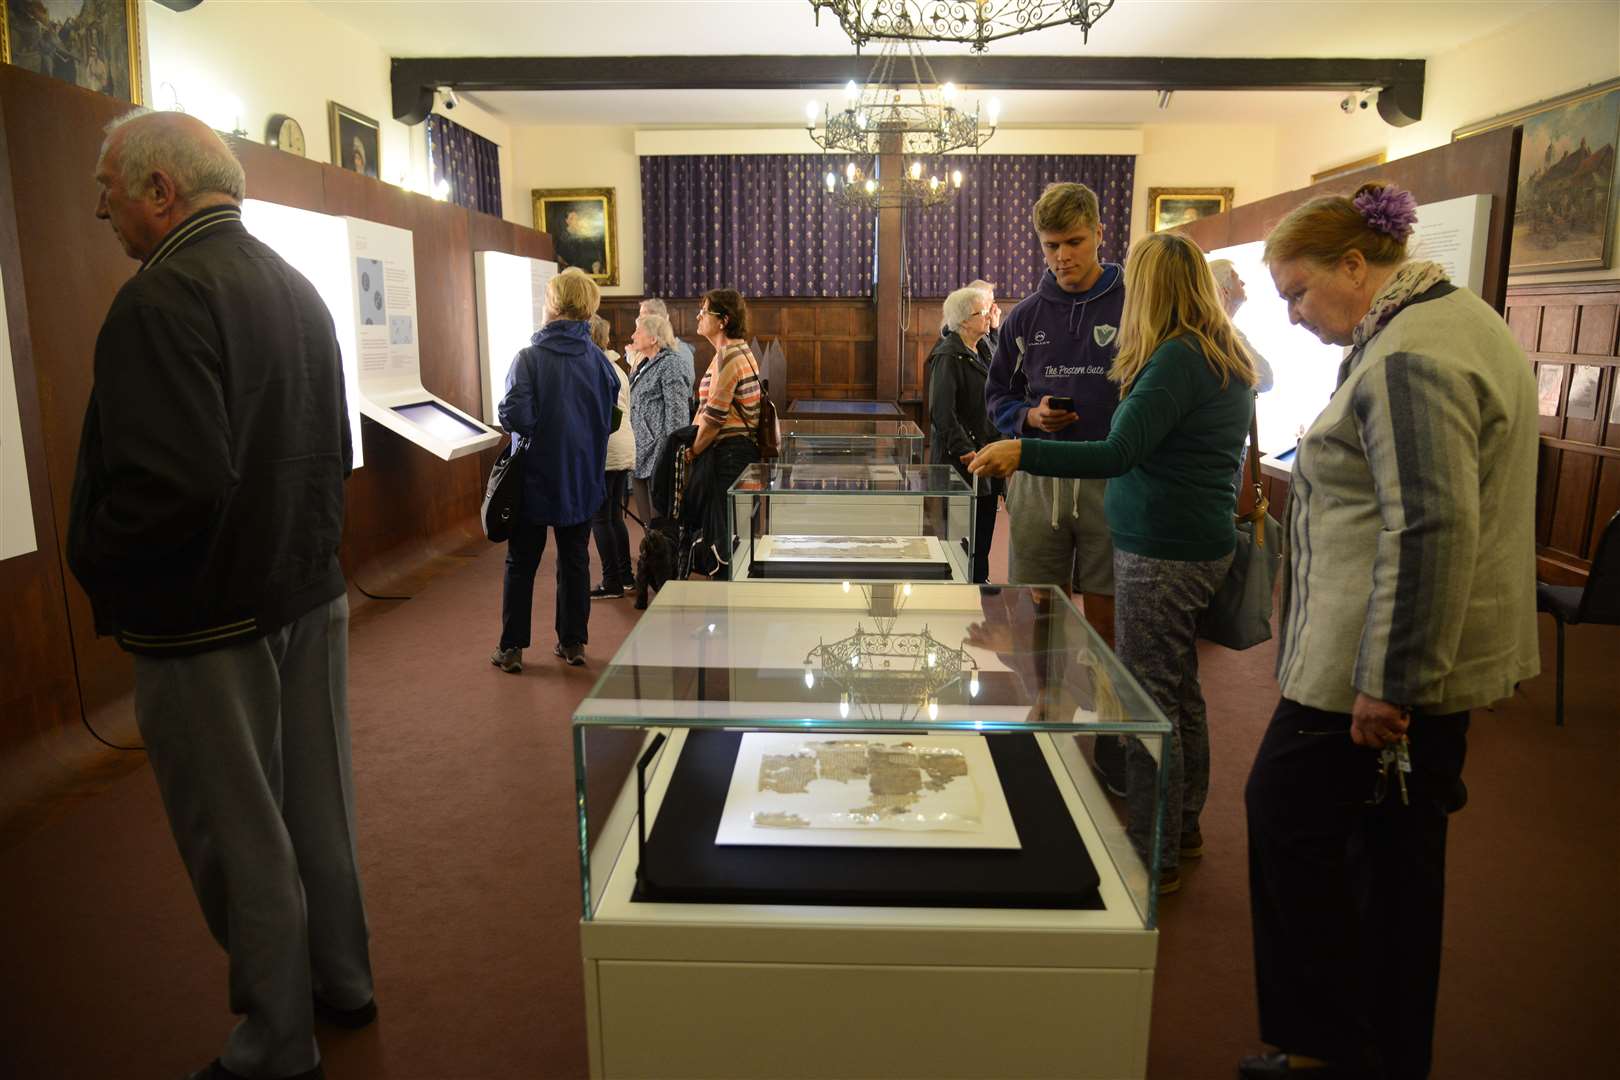 The exhibition at the Guildhall in September 2015